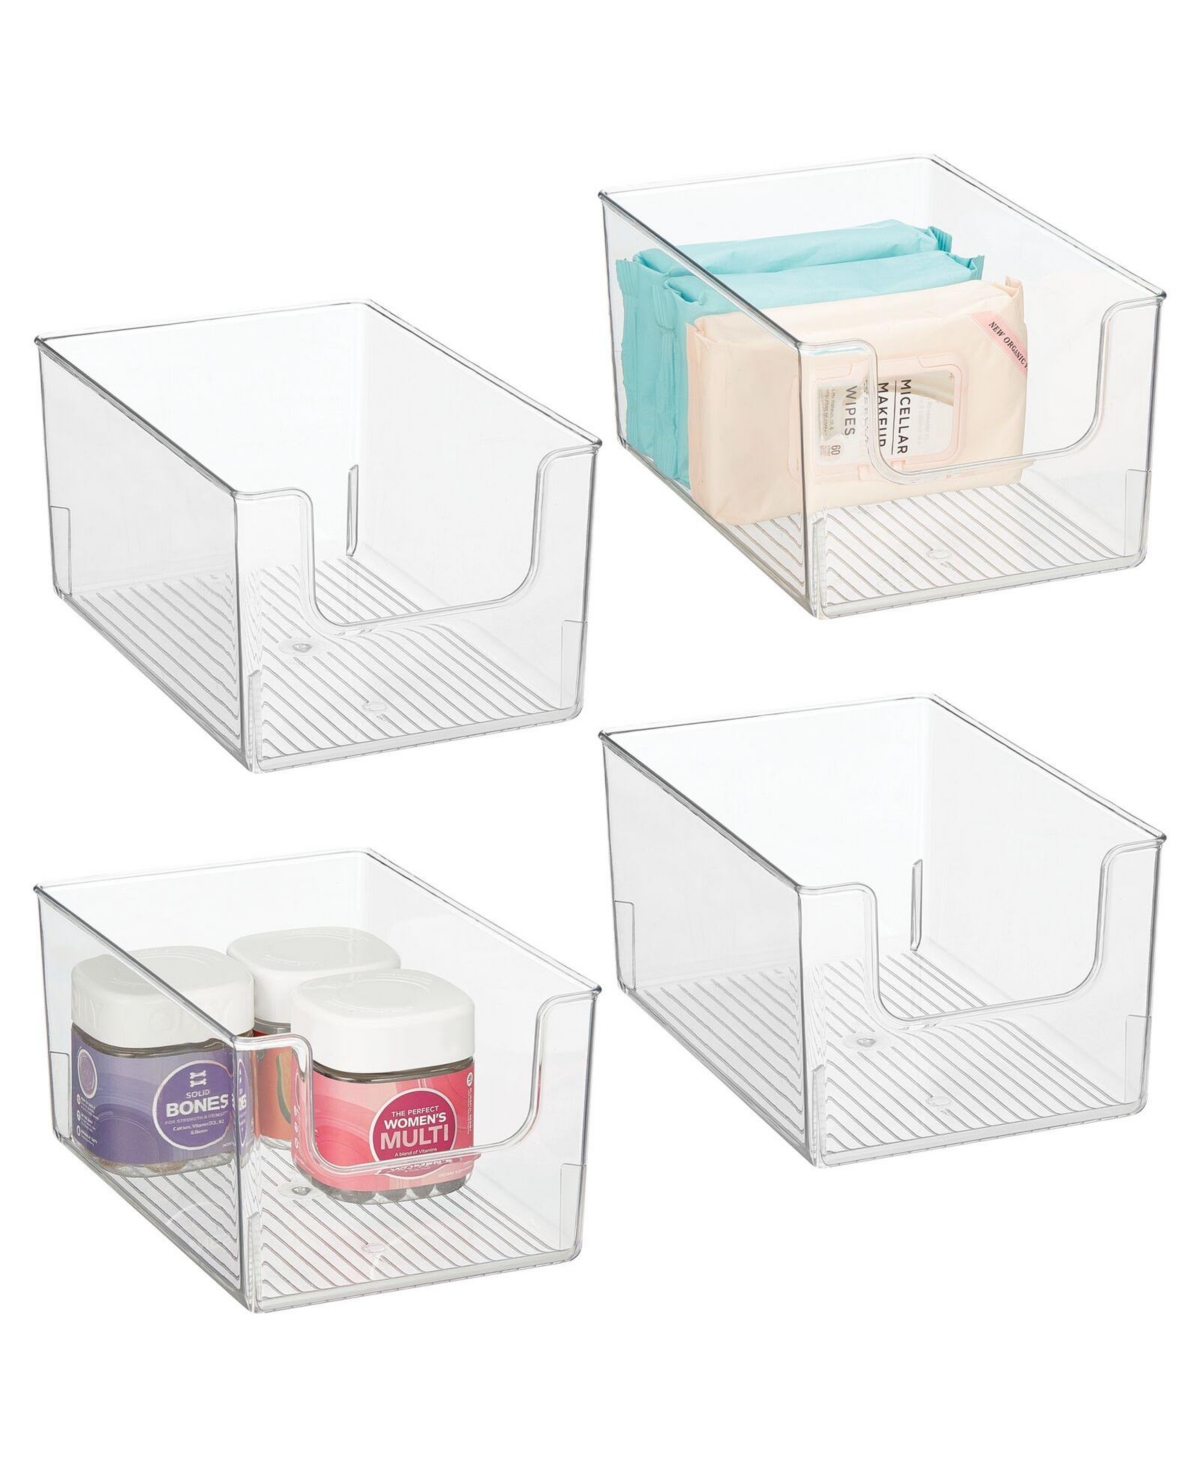 Plastic Bathroom Storage Organizer Bin with Open Front - 4 Pack - Clear